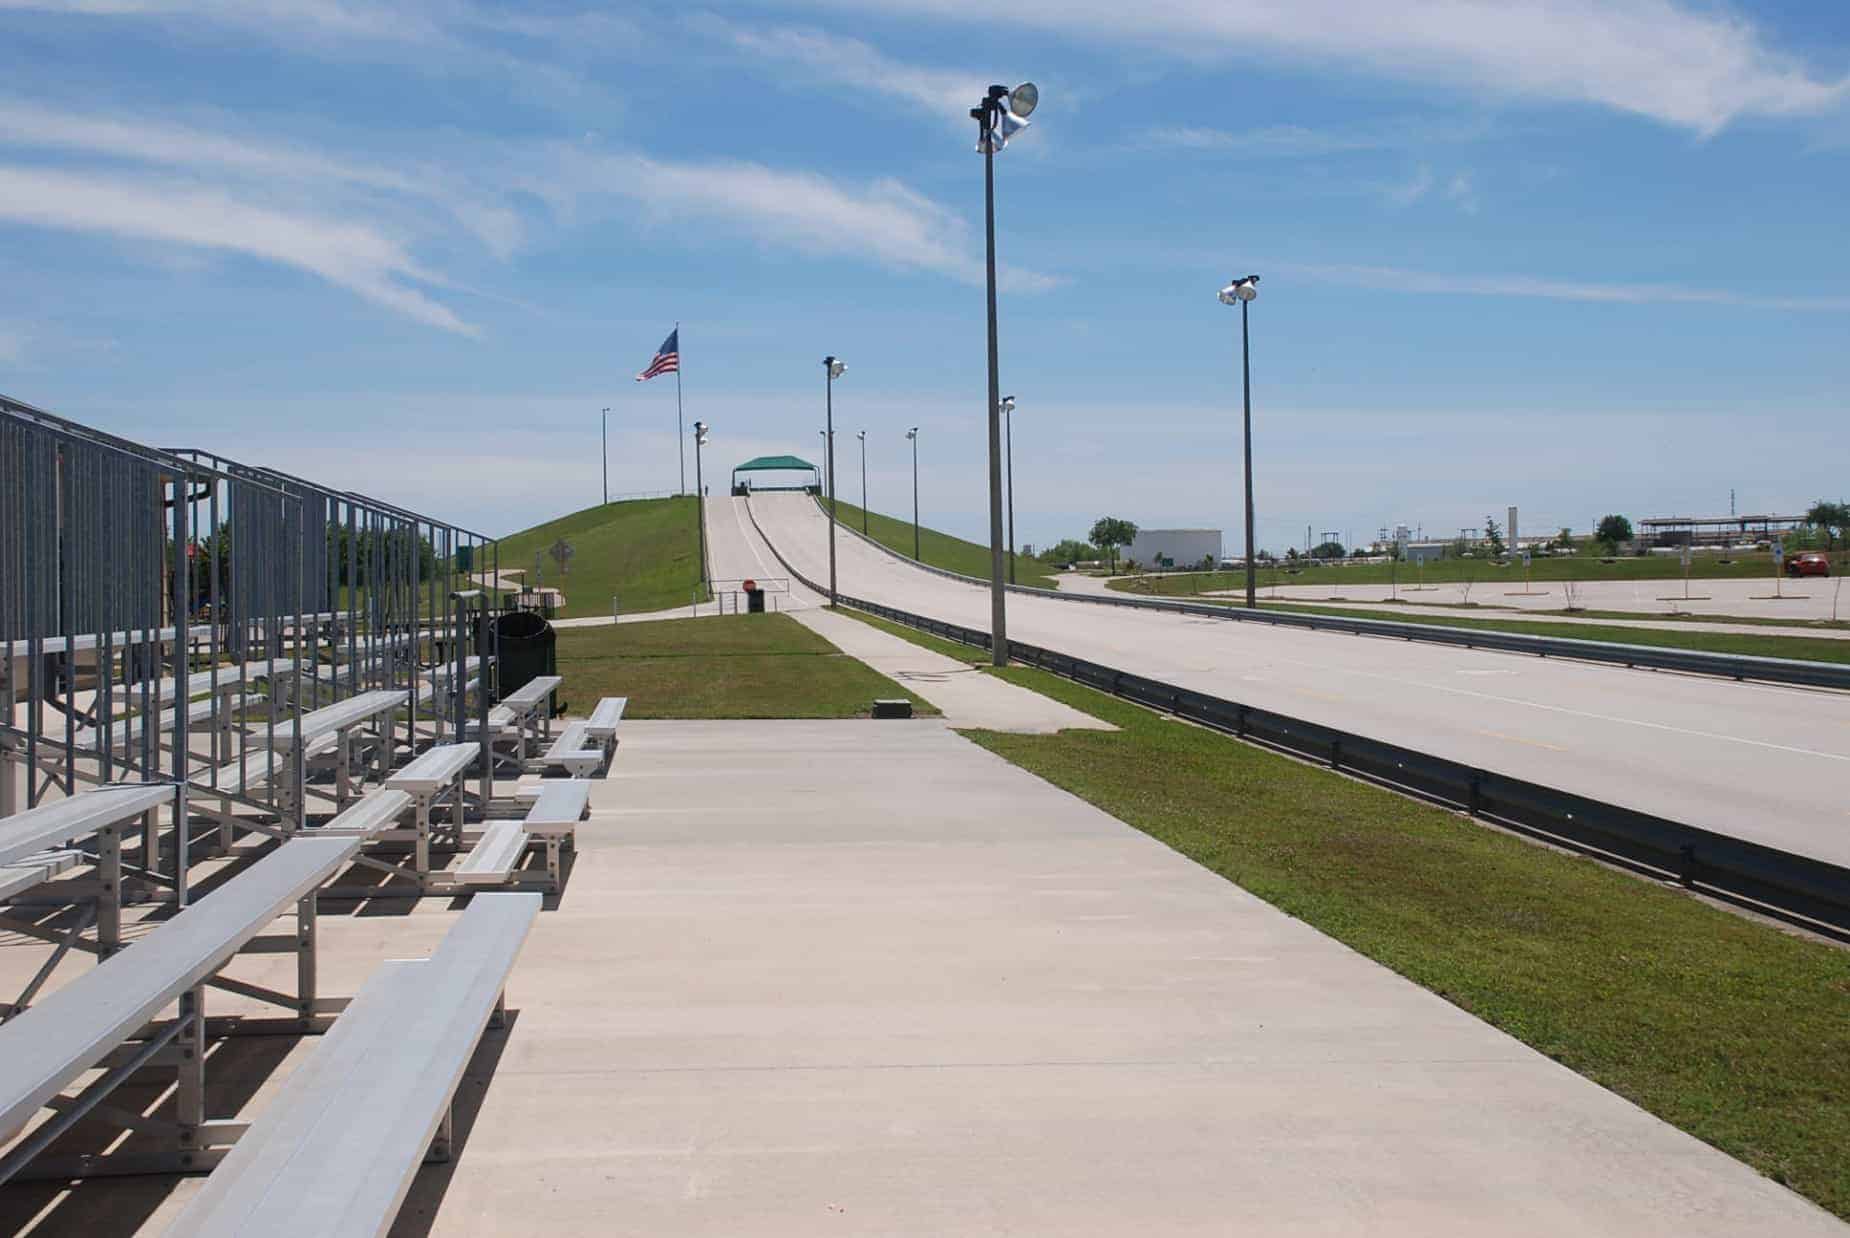 Hockley Recreational Complex's Soap Box Derby Track (GHSBD.org)